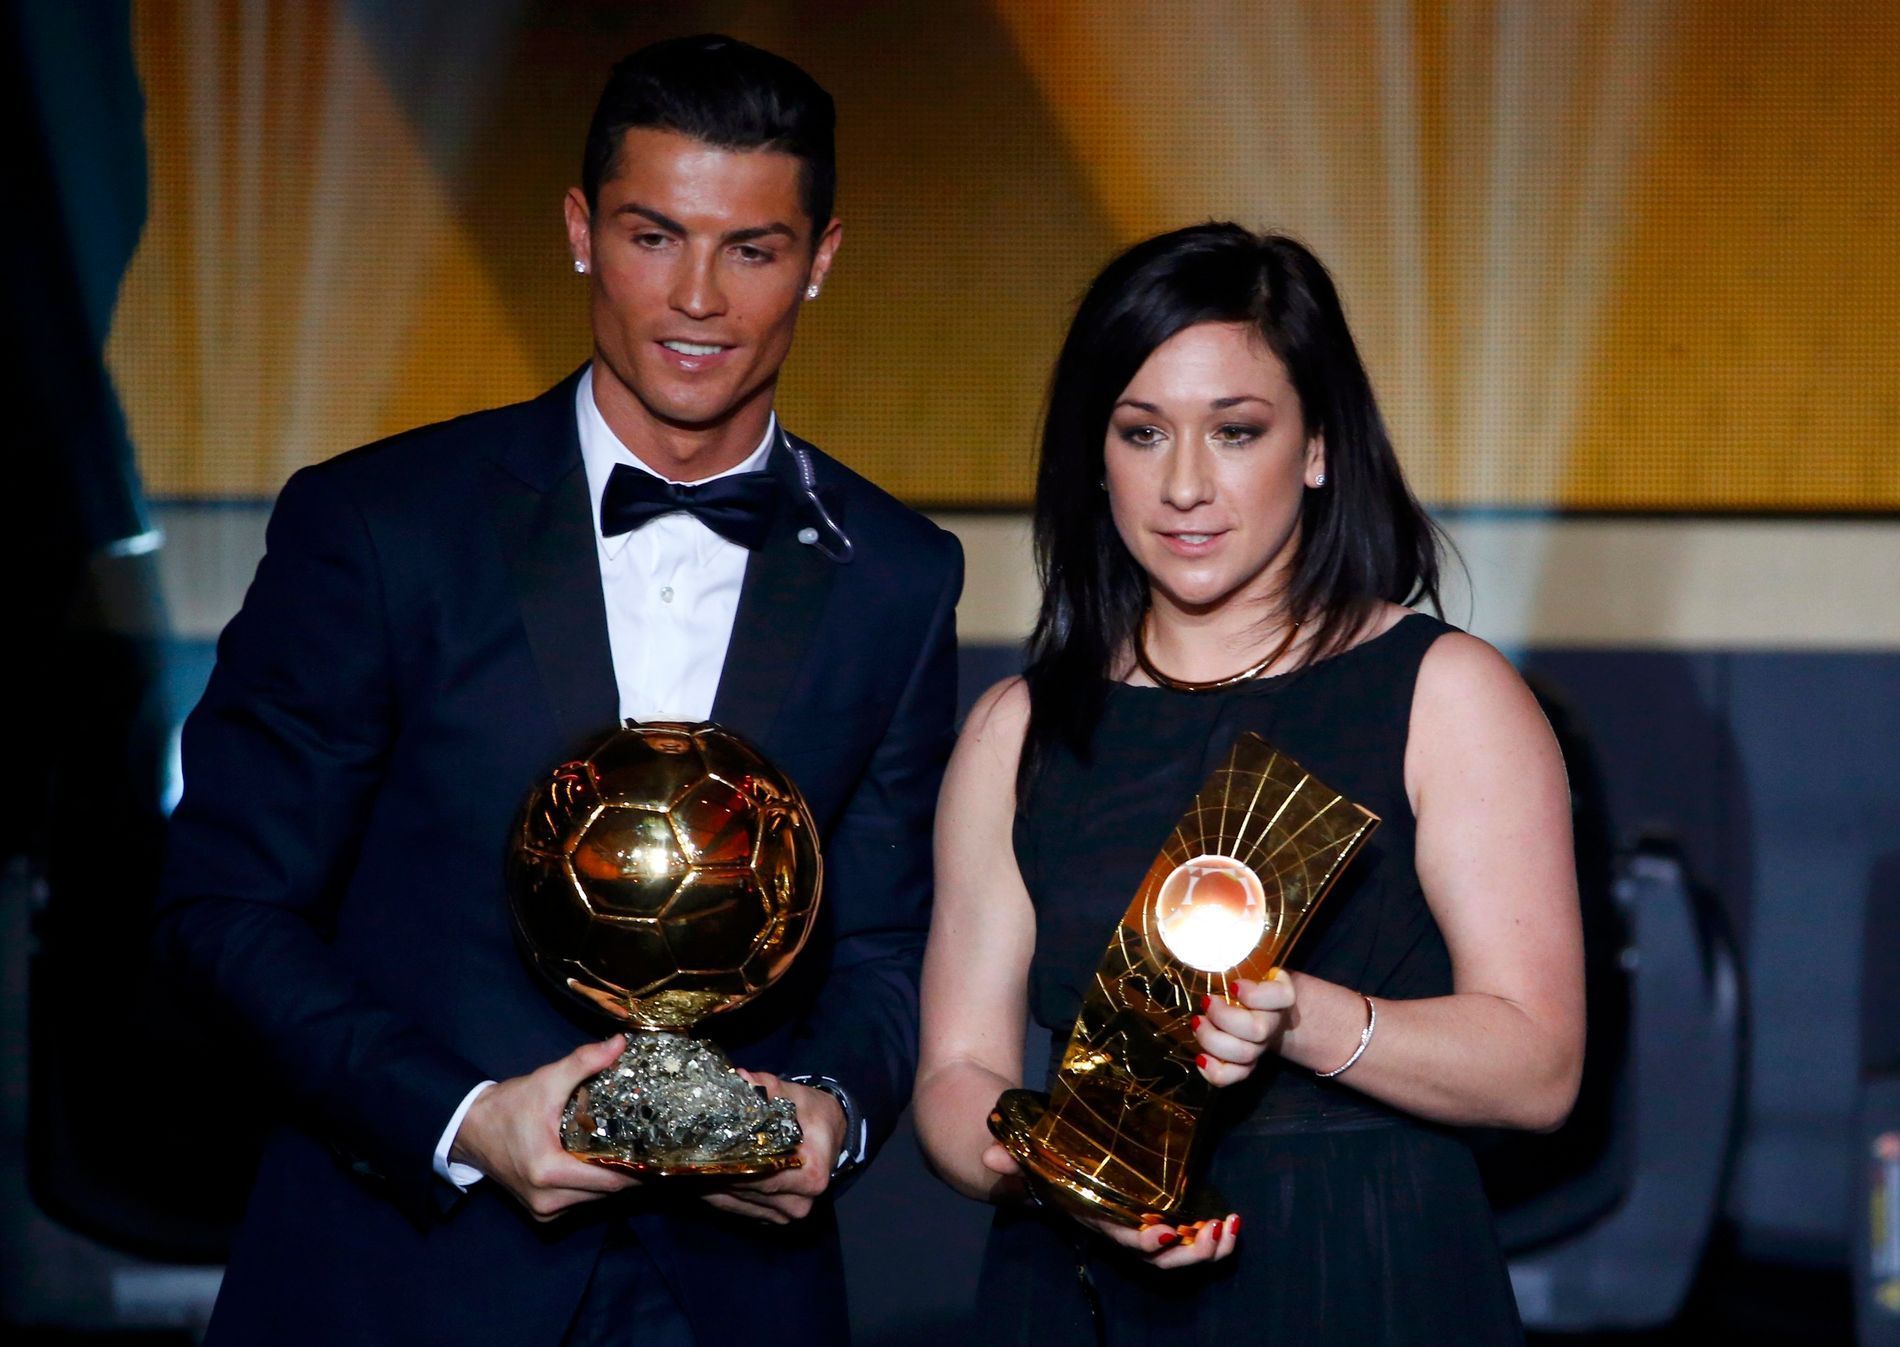 Winner of FIFA Ballon d'Or award, Real Madrid and Portugal forward Ronaldo poses with winner of the FIFA Women's World Player of the Year Kessler of Germany during the FIFA Ballon d'Or 2014 soccer awa